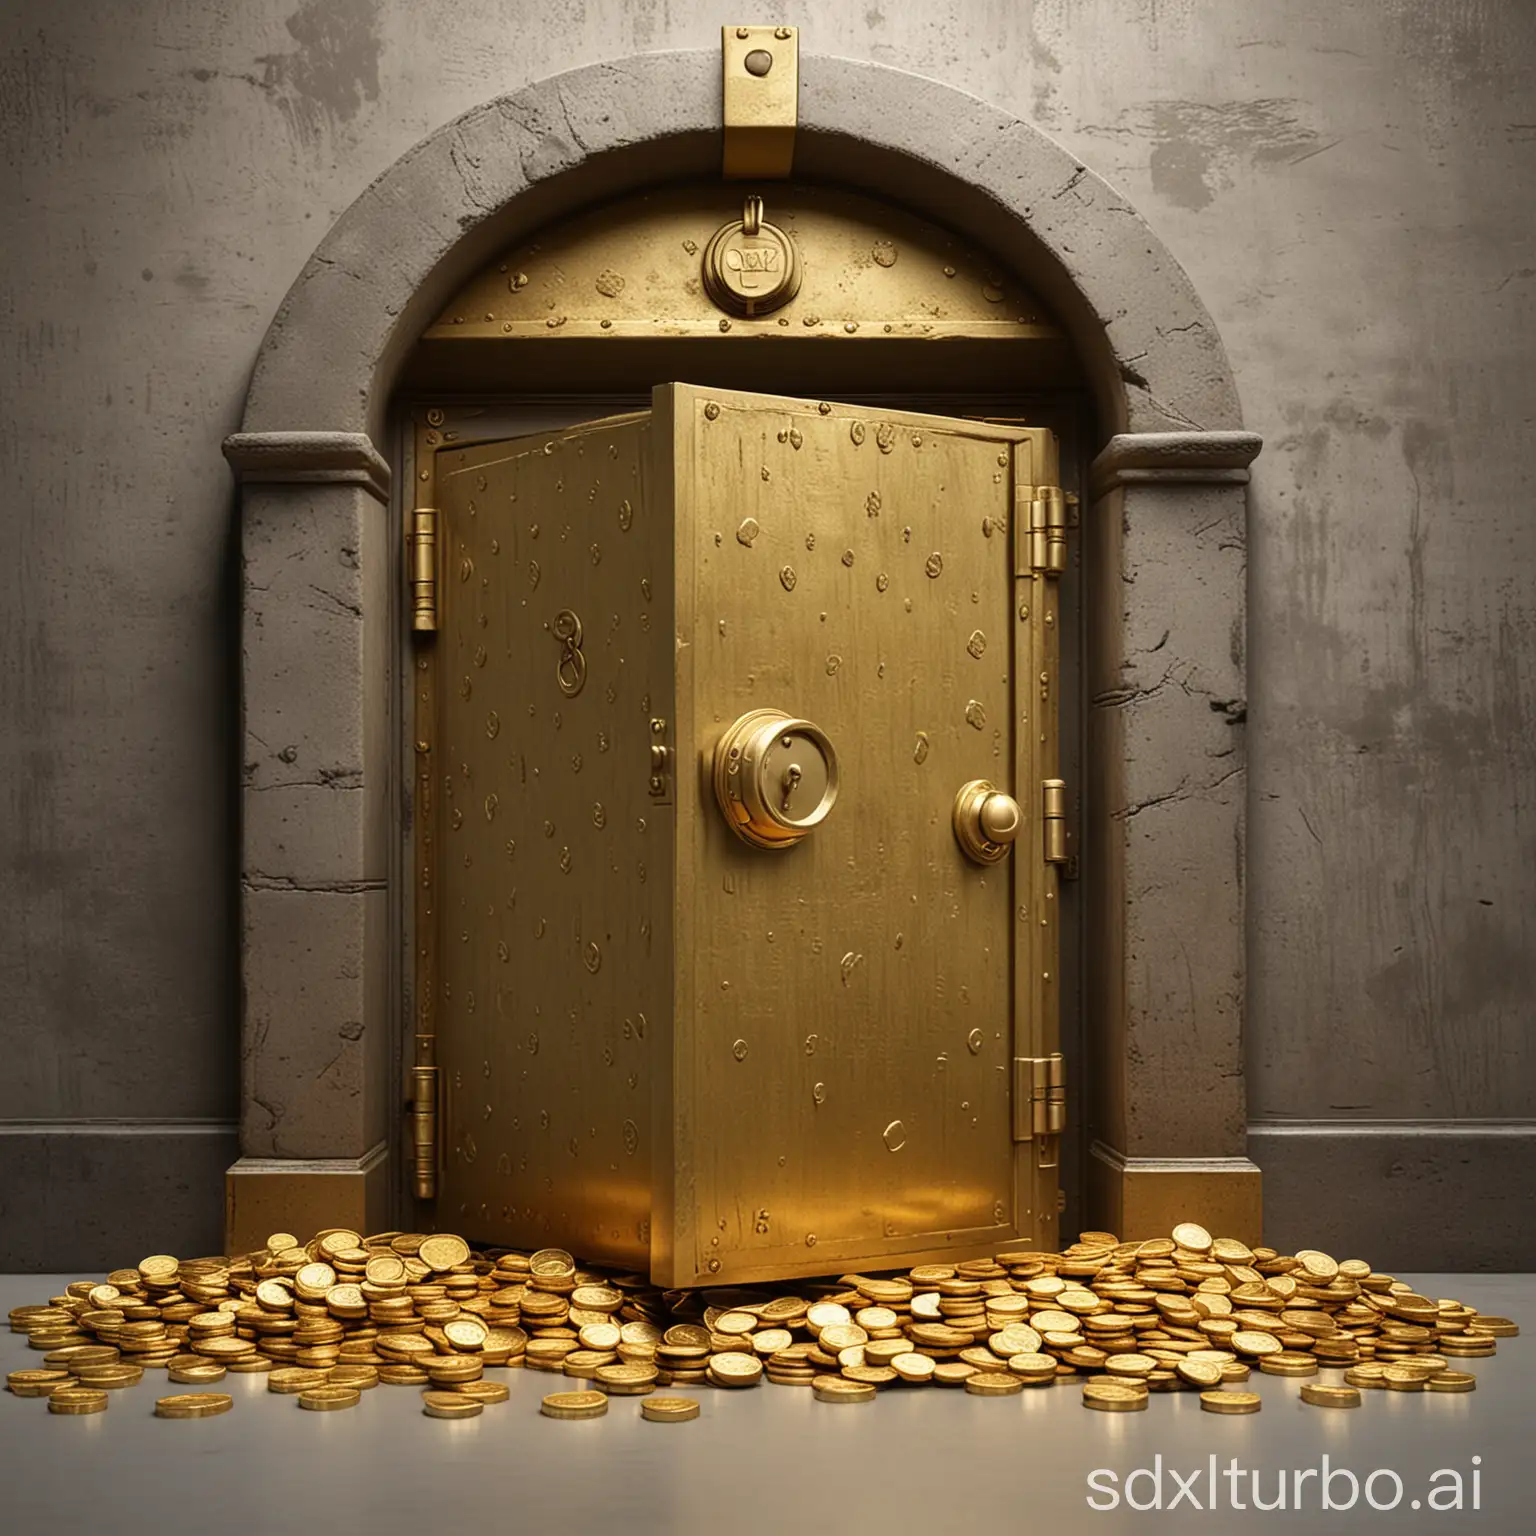 Vault with closed door with many gold coins in front, drawn.